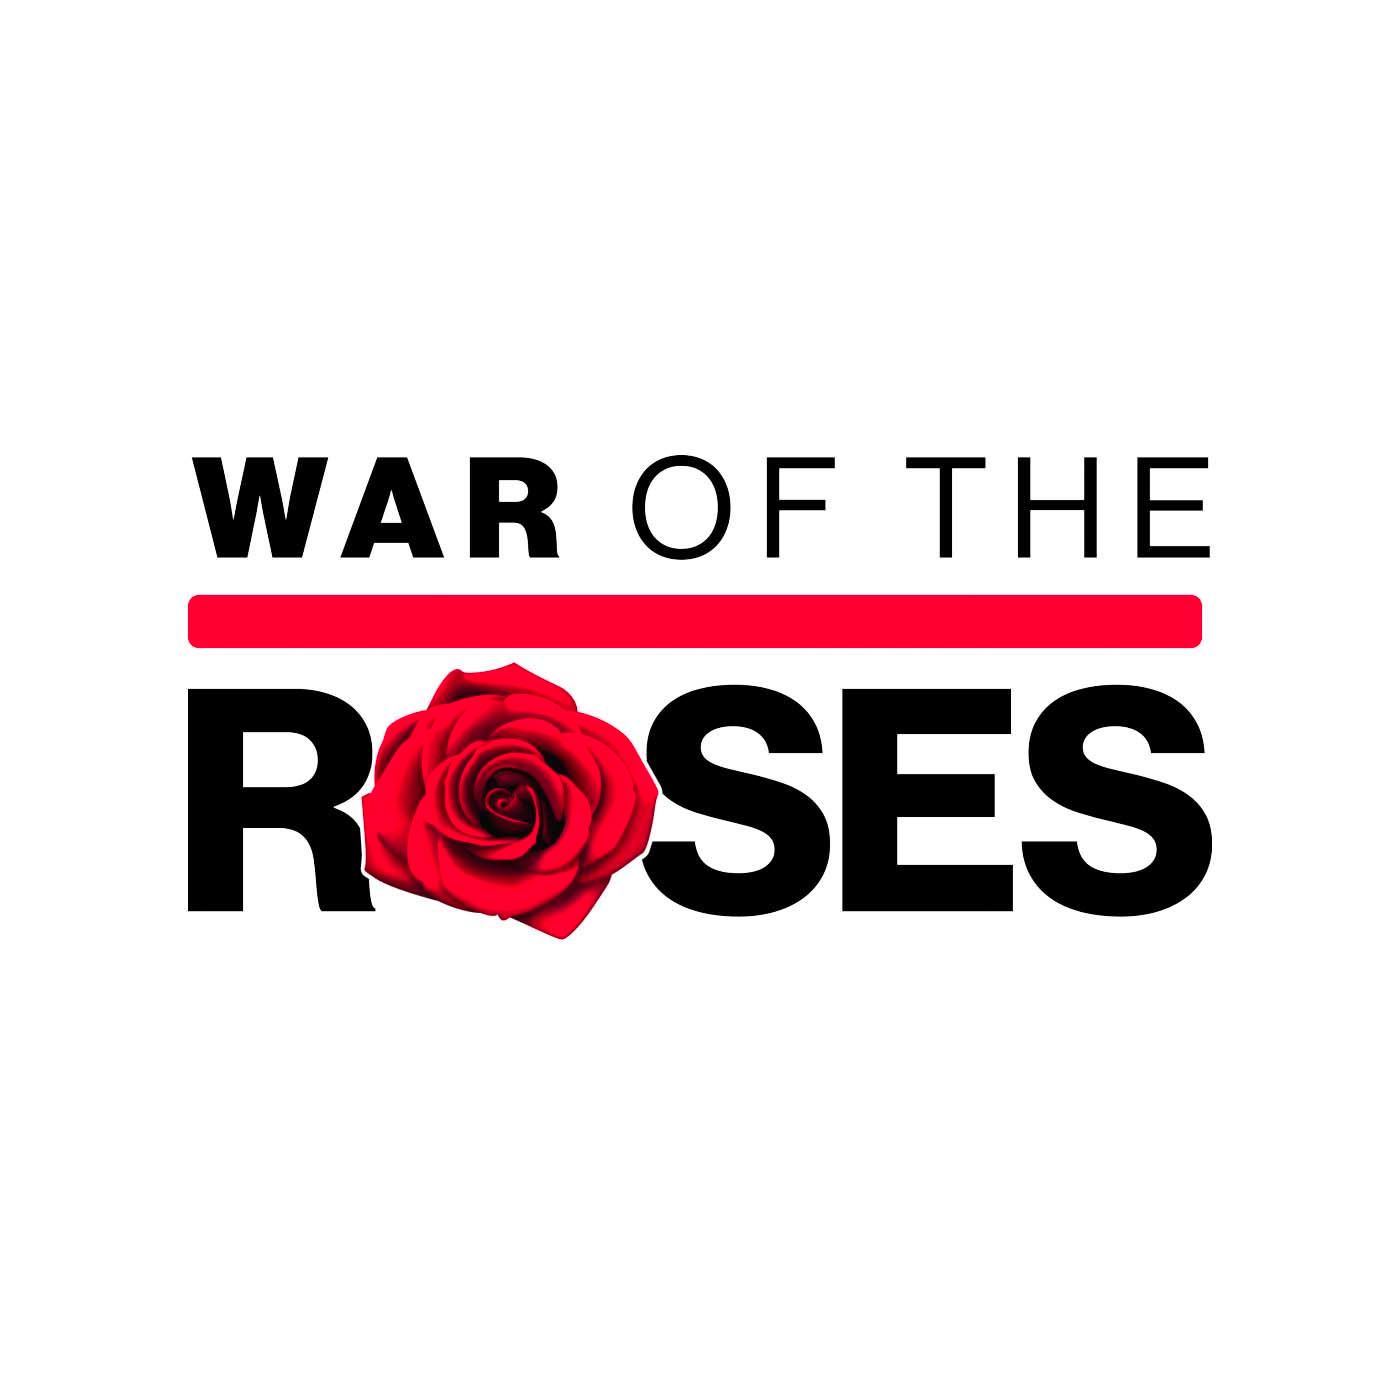 War Of The Roses: Why Is There Underwear In Our Trash?